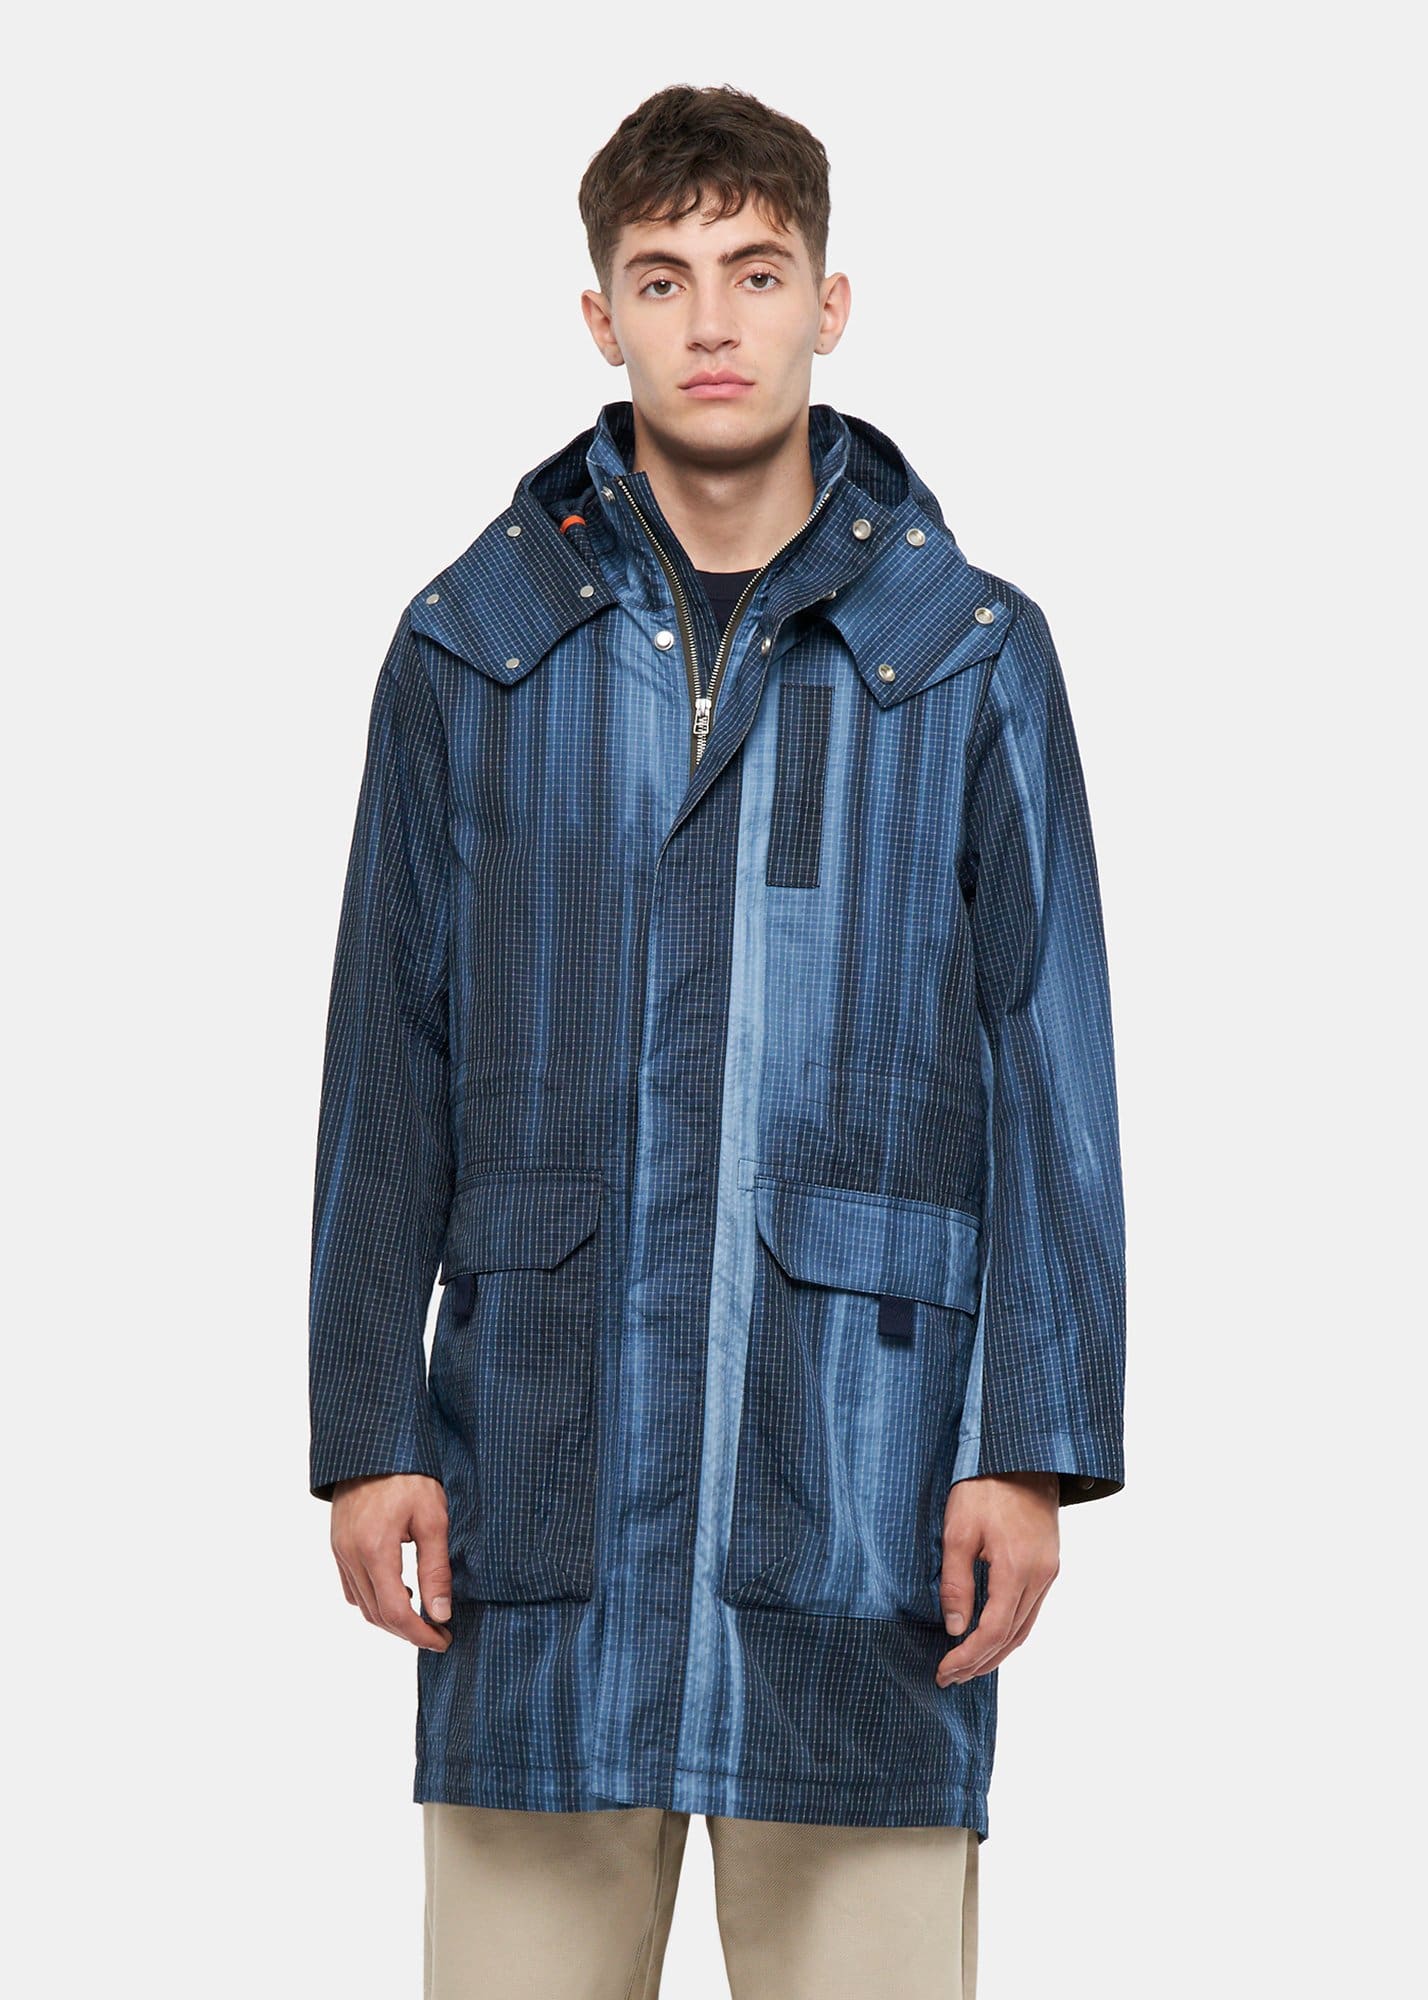 Tie Dye Severn Parka Jacket | Made In England | Gloverall – Gloverall